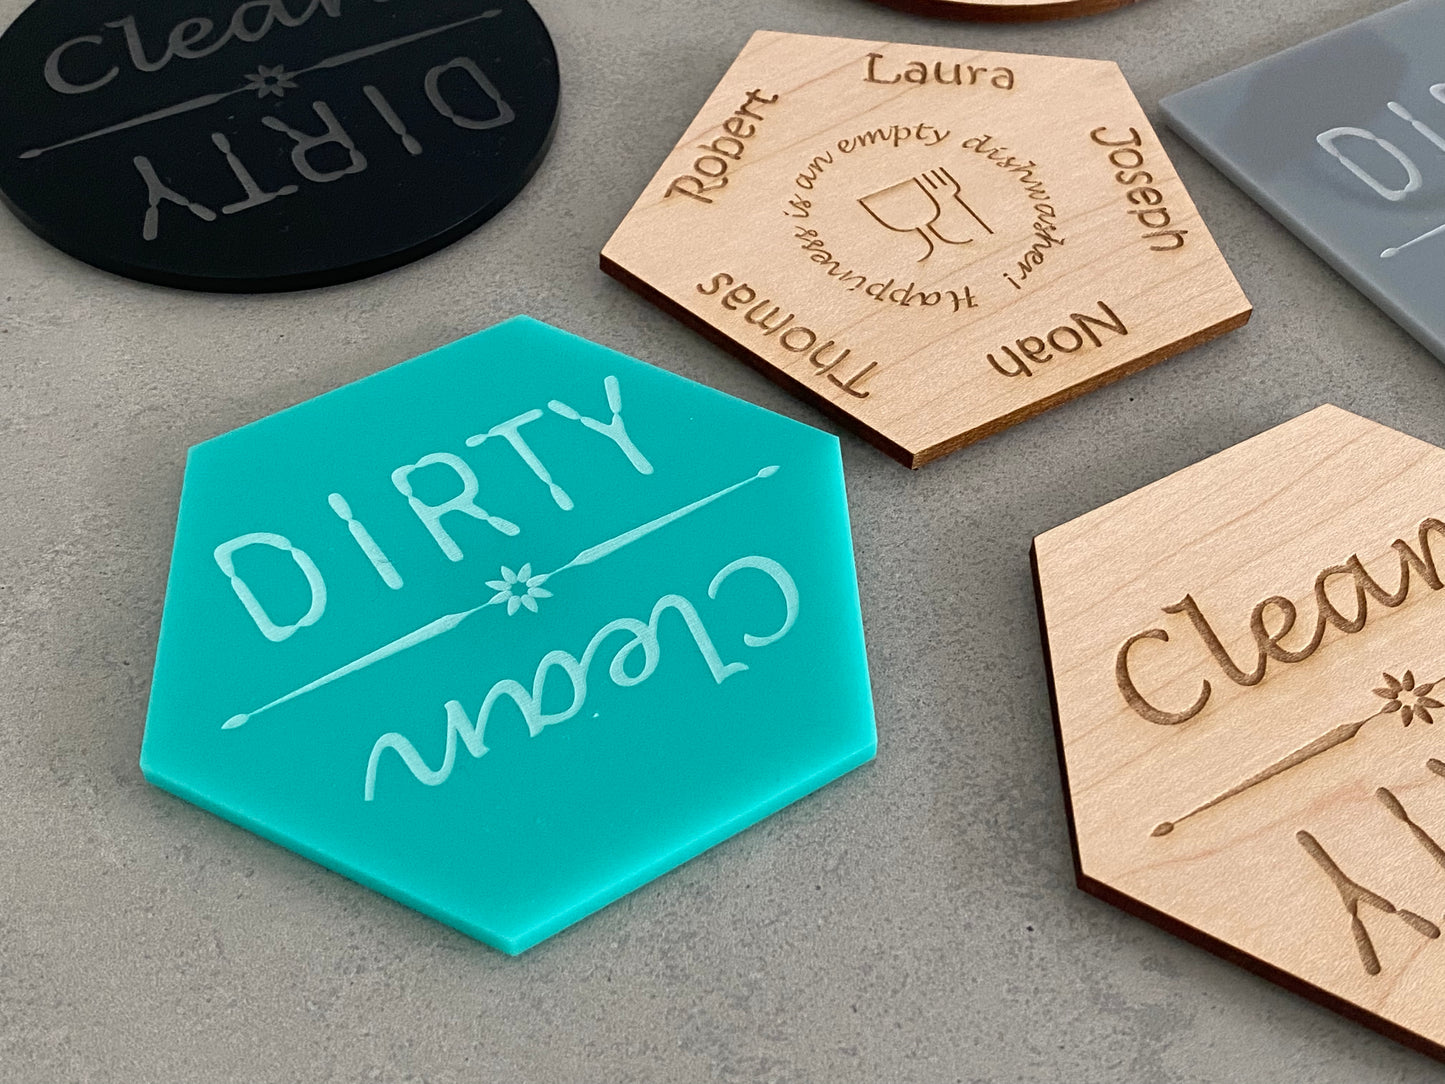 Dishwasher Magnet | Dirty & Clean